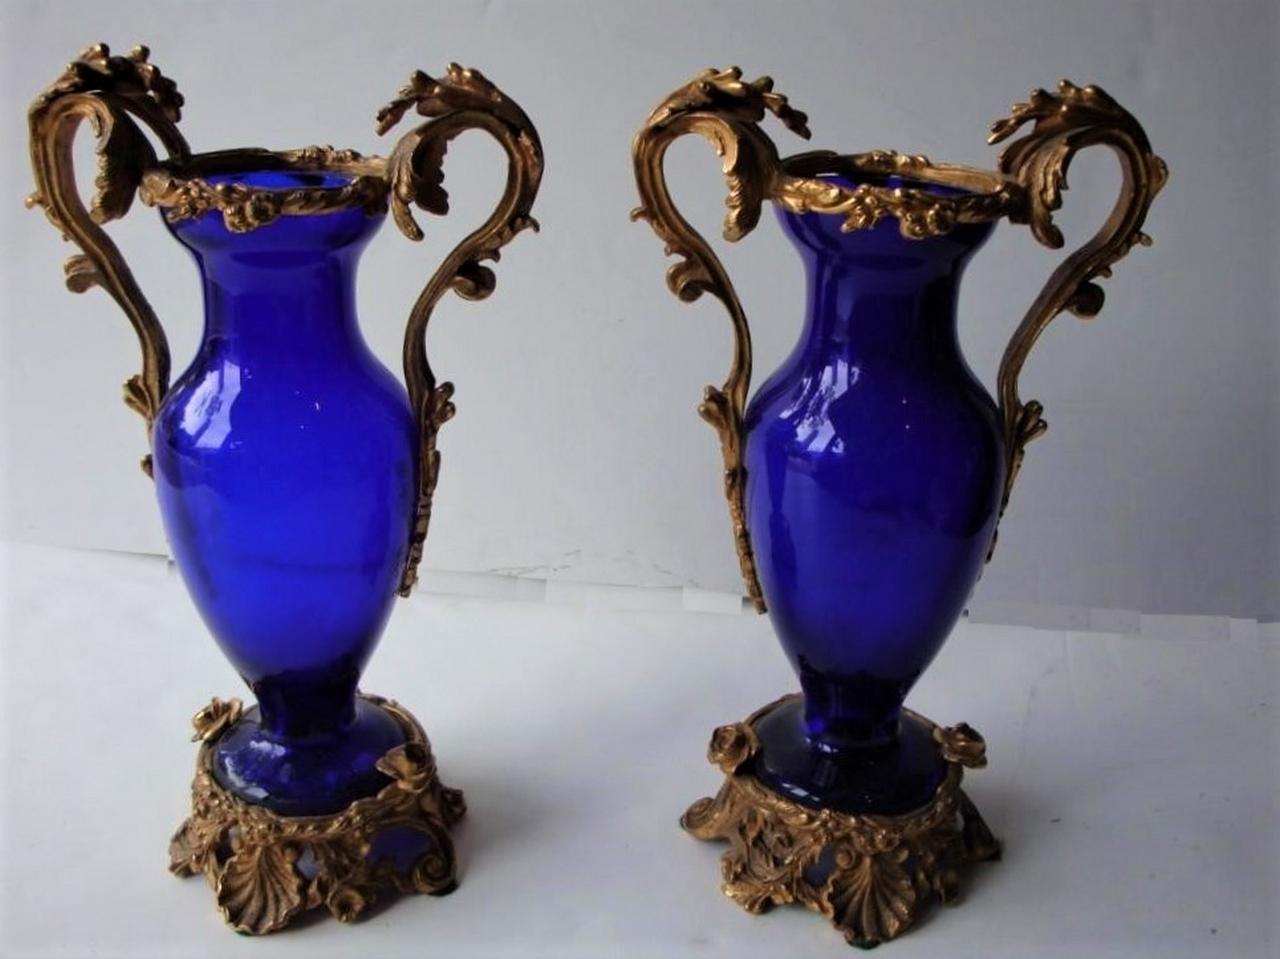 The Following Item we are offering is a Pair of Rare 19th Century Neo-Classical Cobalt Blue Glass and Bronze Mounted Centepiece Vases with Floriflora handles and Rim and Scrolled Bases with Flowers and Shells. These Beautiful Pieces were Originally